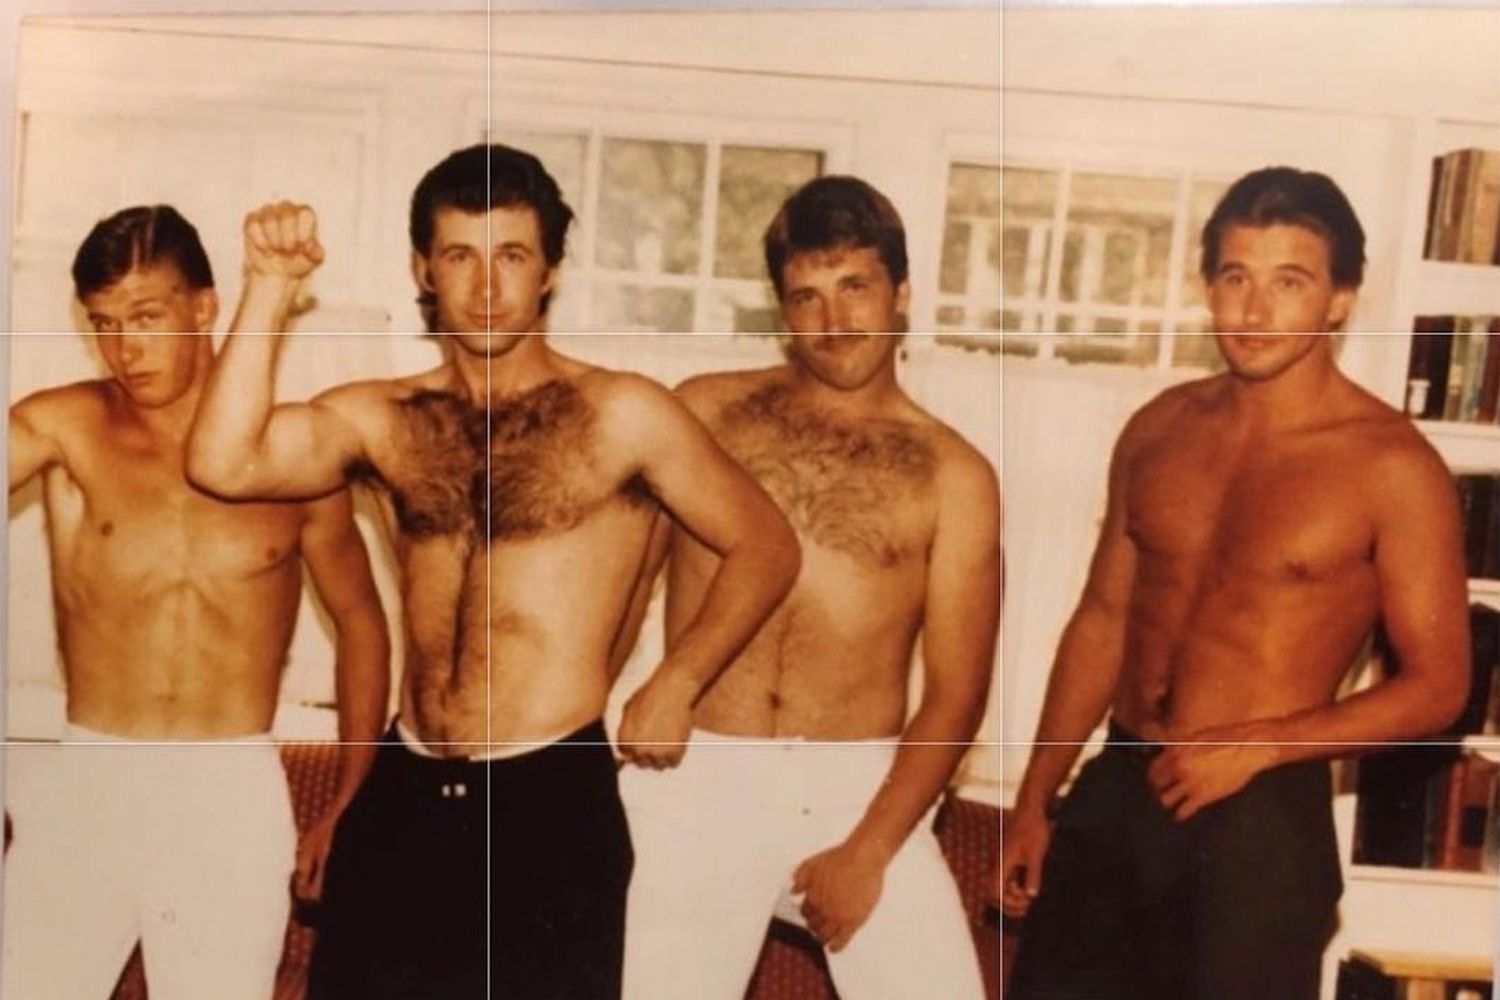 Alec Baldwin is remembering the good days with his brothers in an amazing t...